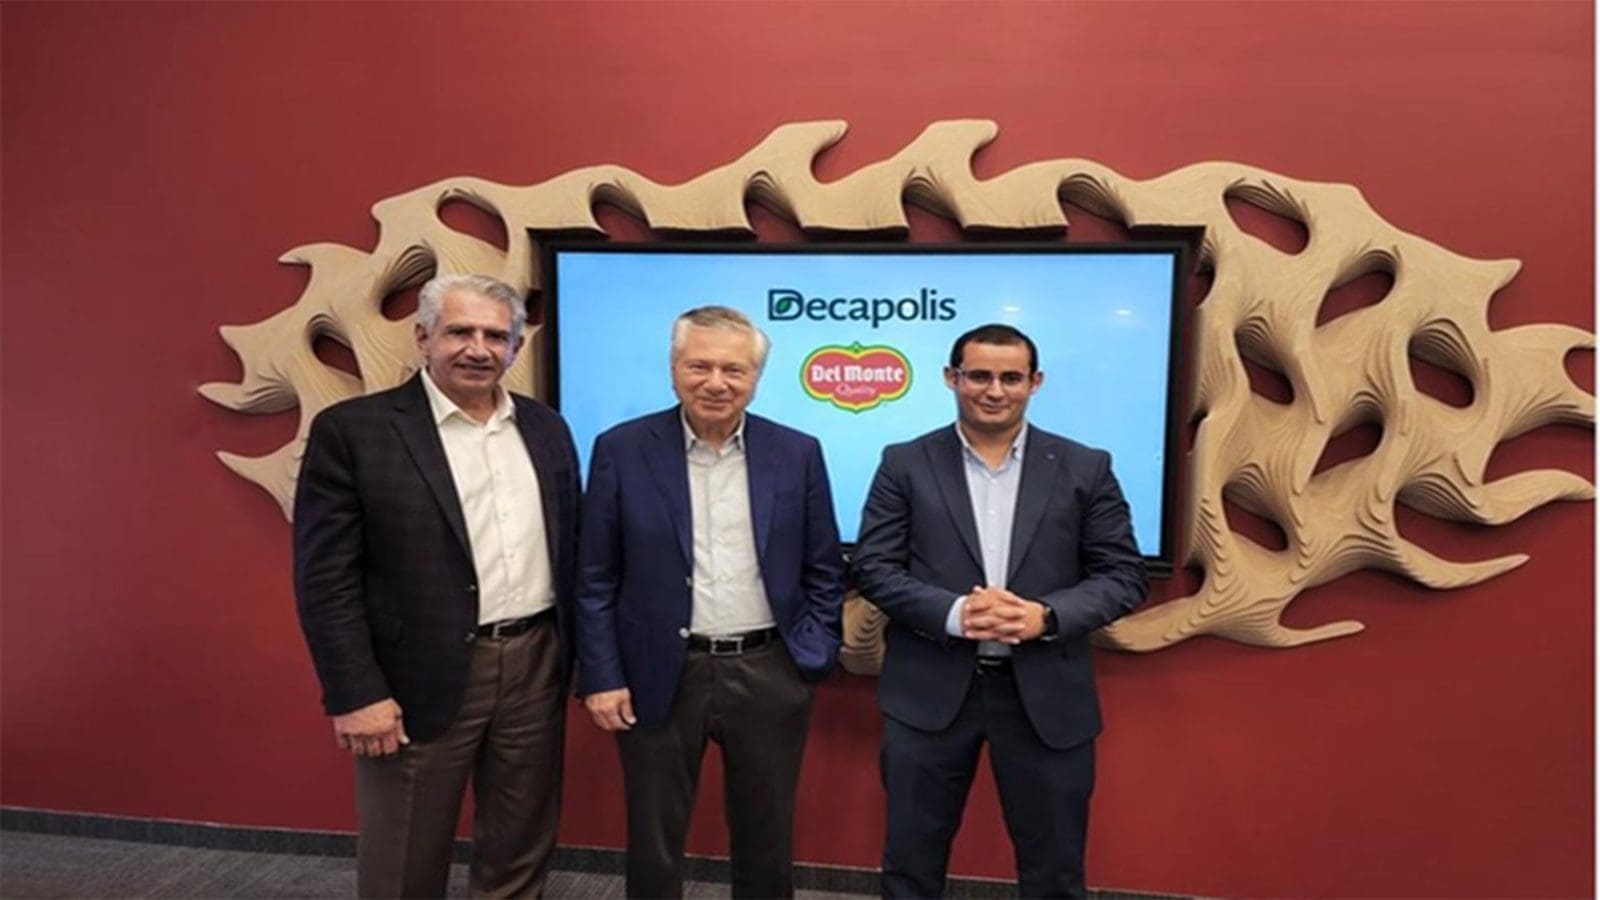 Fresh Del Monte Produce partners with Decapolis to enable traceability for consumers